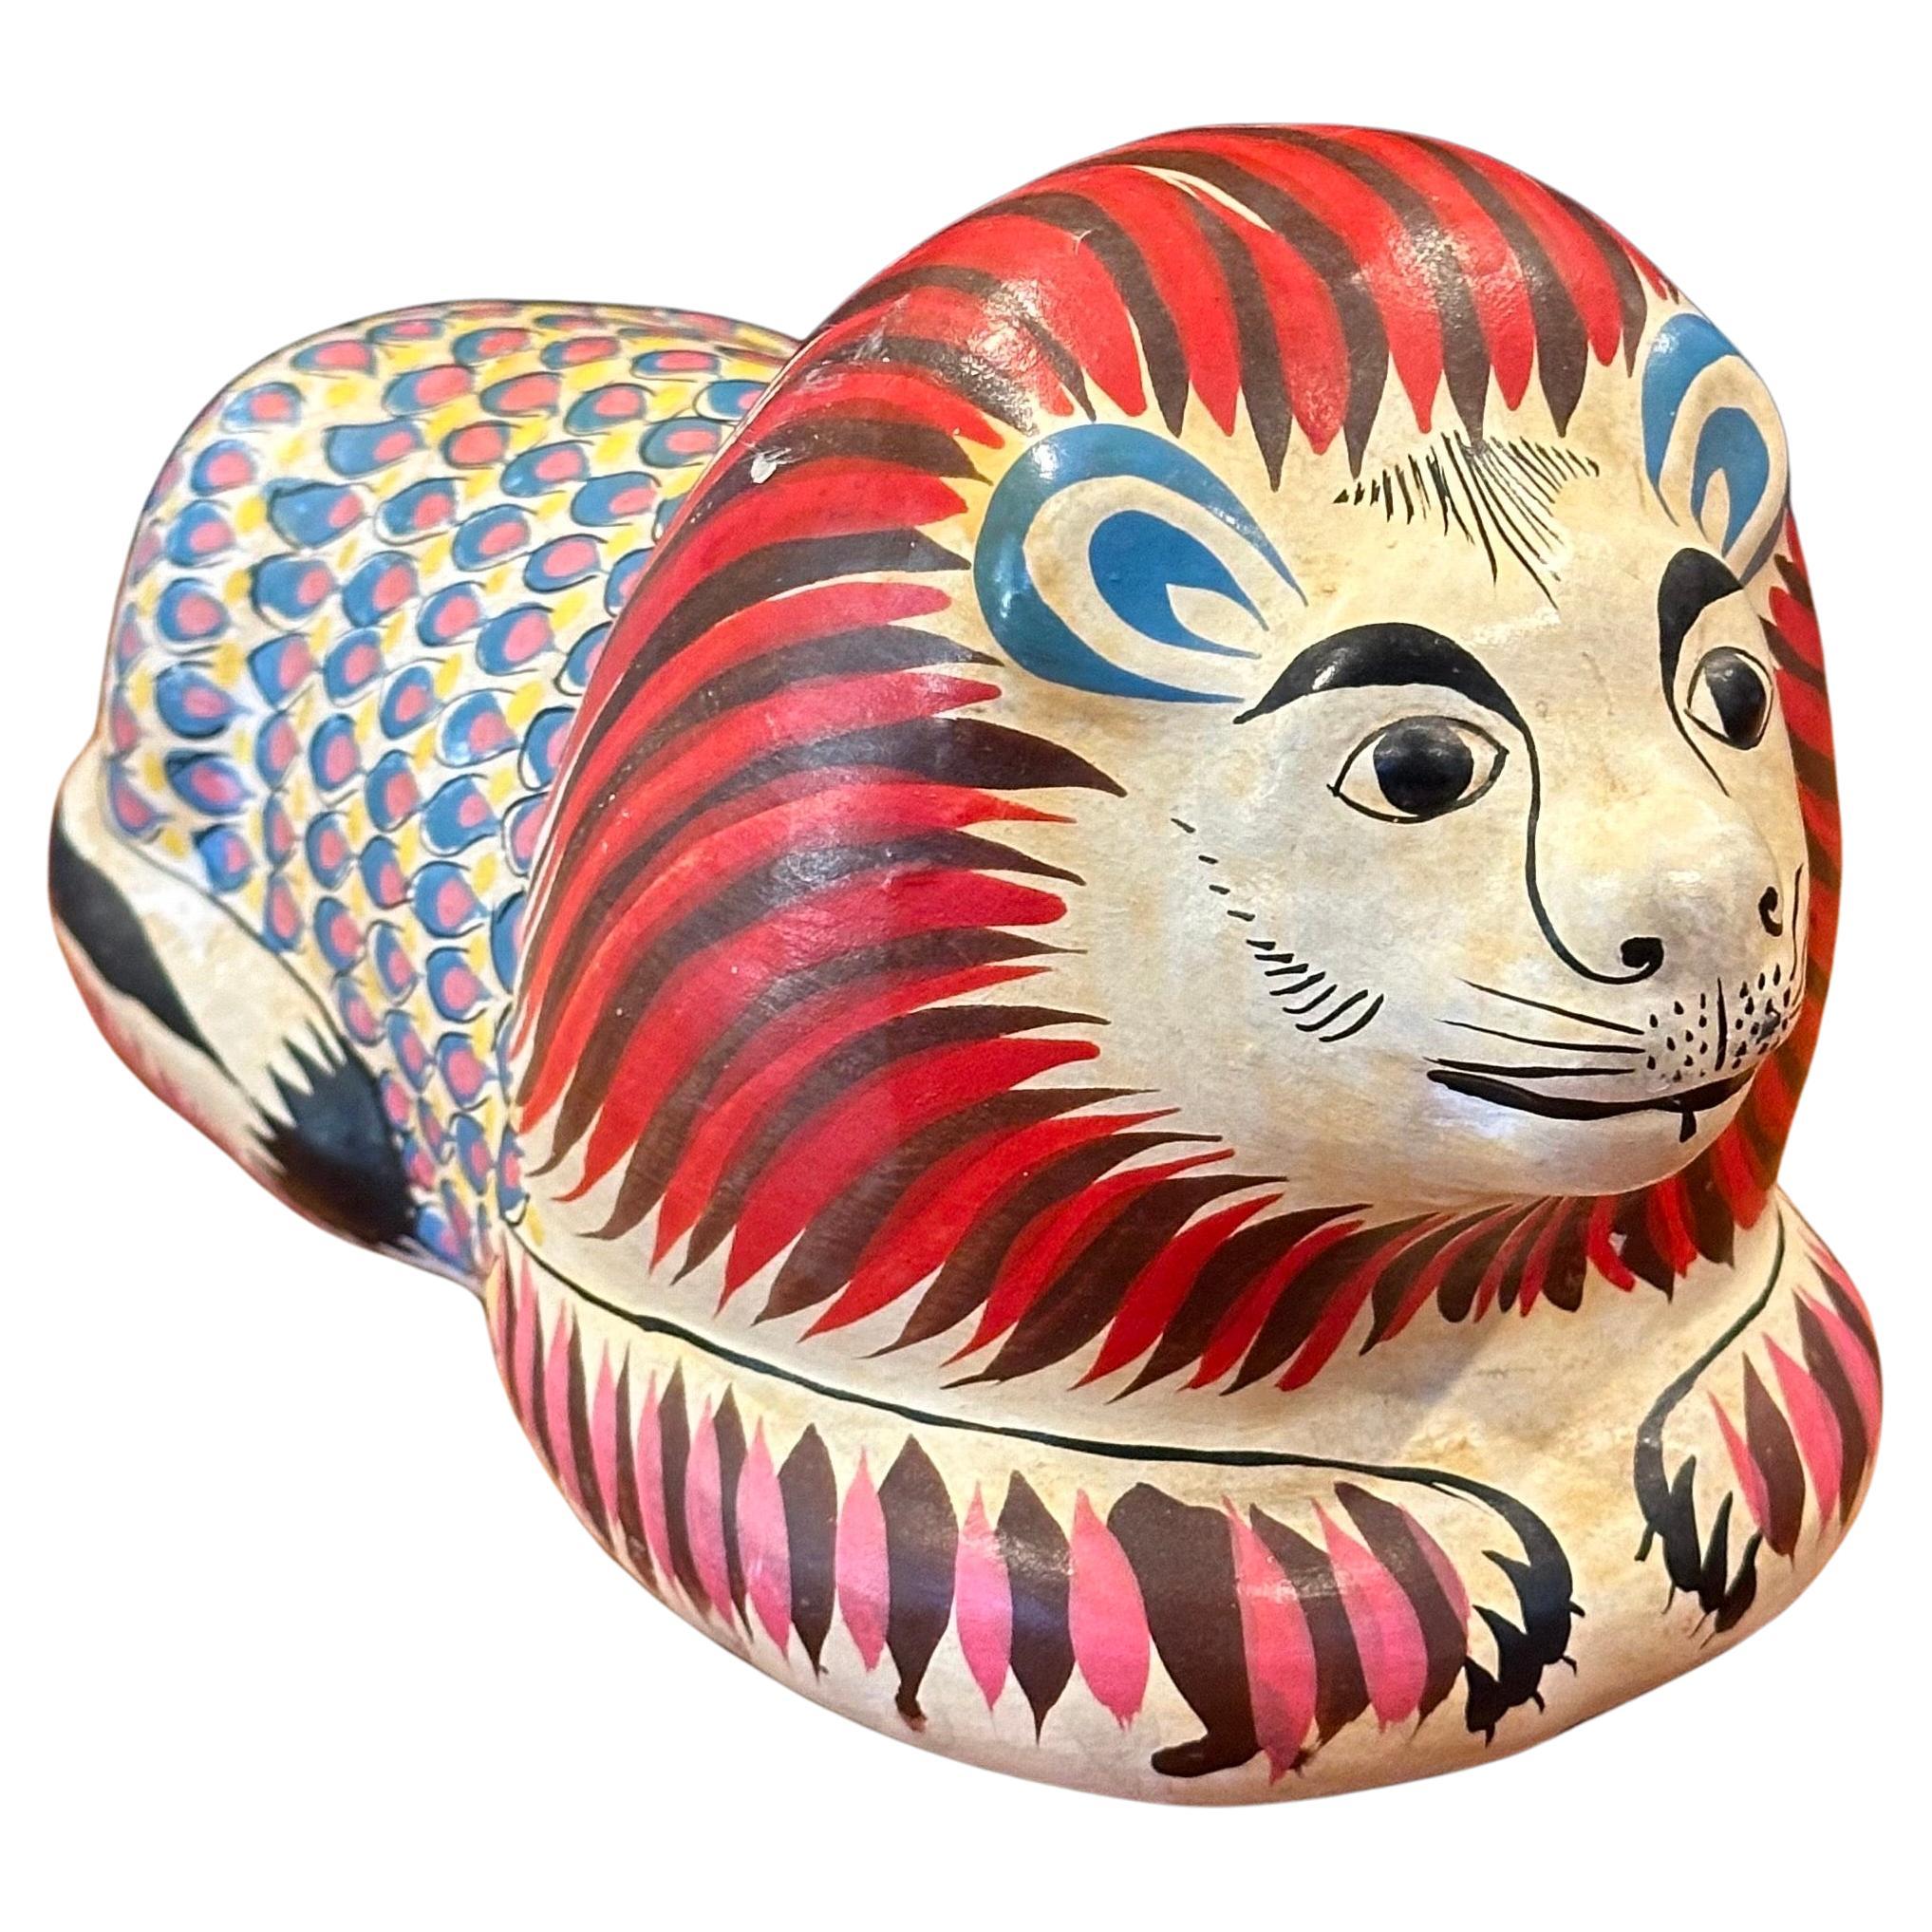 Whimsical Hand Painted Ceramic Lion Sculpture in the Style of Sergio Bustamante